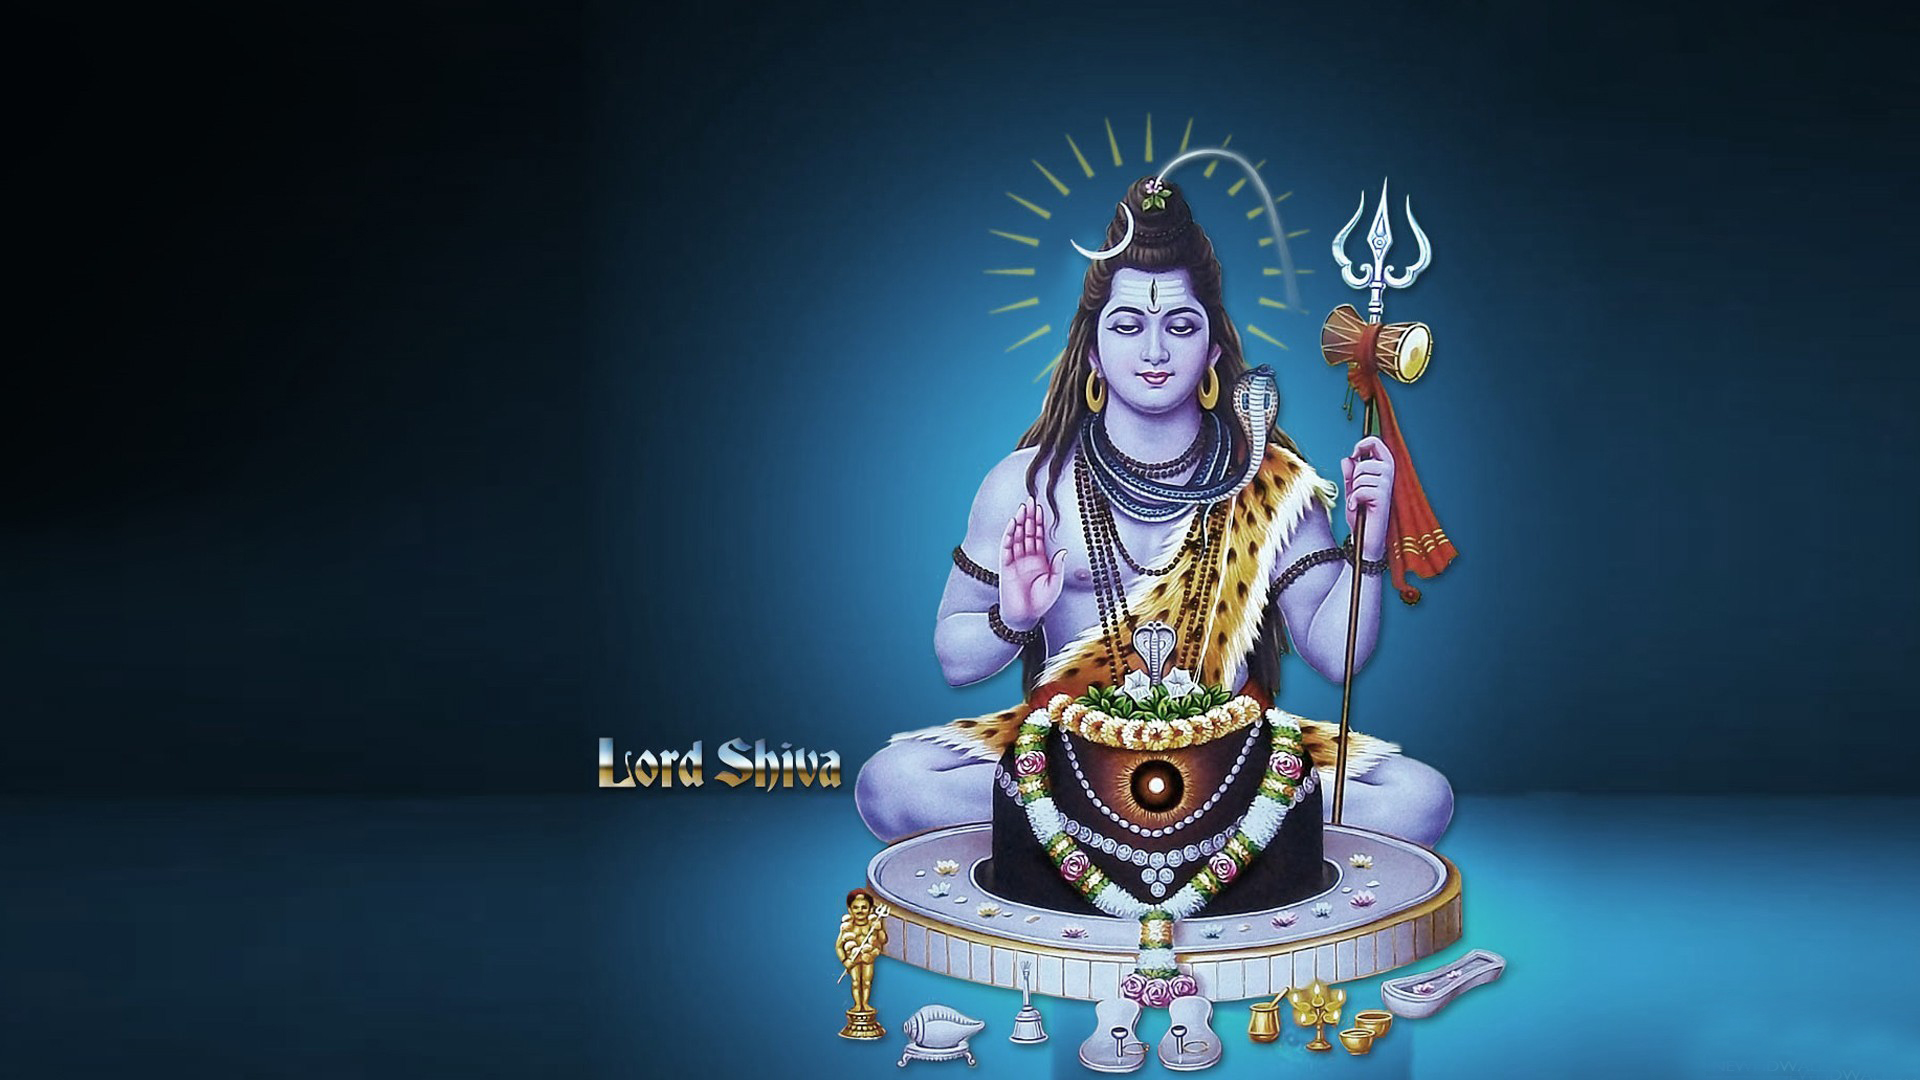 Lord Shiva Wallpapers Free Download Lord Shiva Wallpapers - Shiv Shankar  Image Blue Background - 1920x1080 Wallpaper 